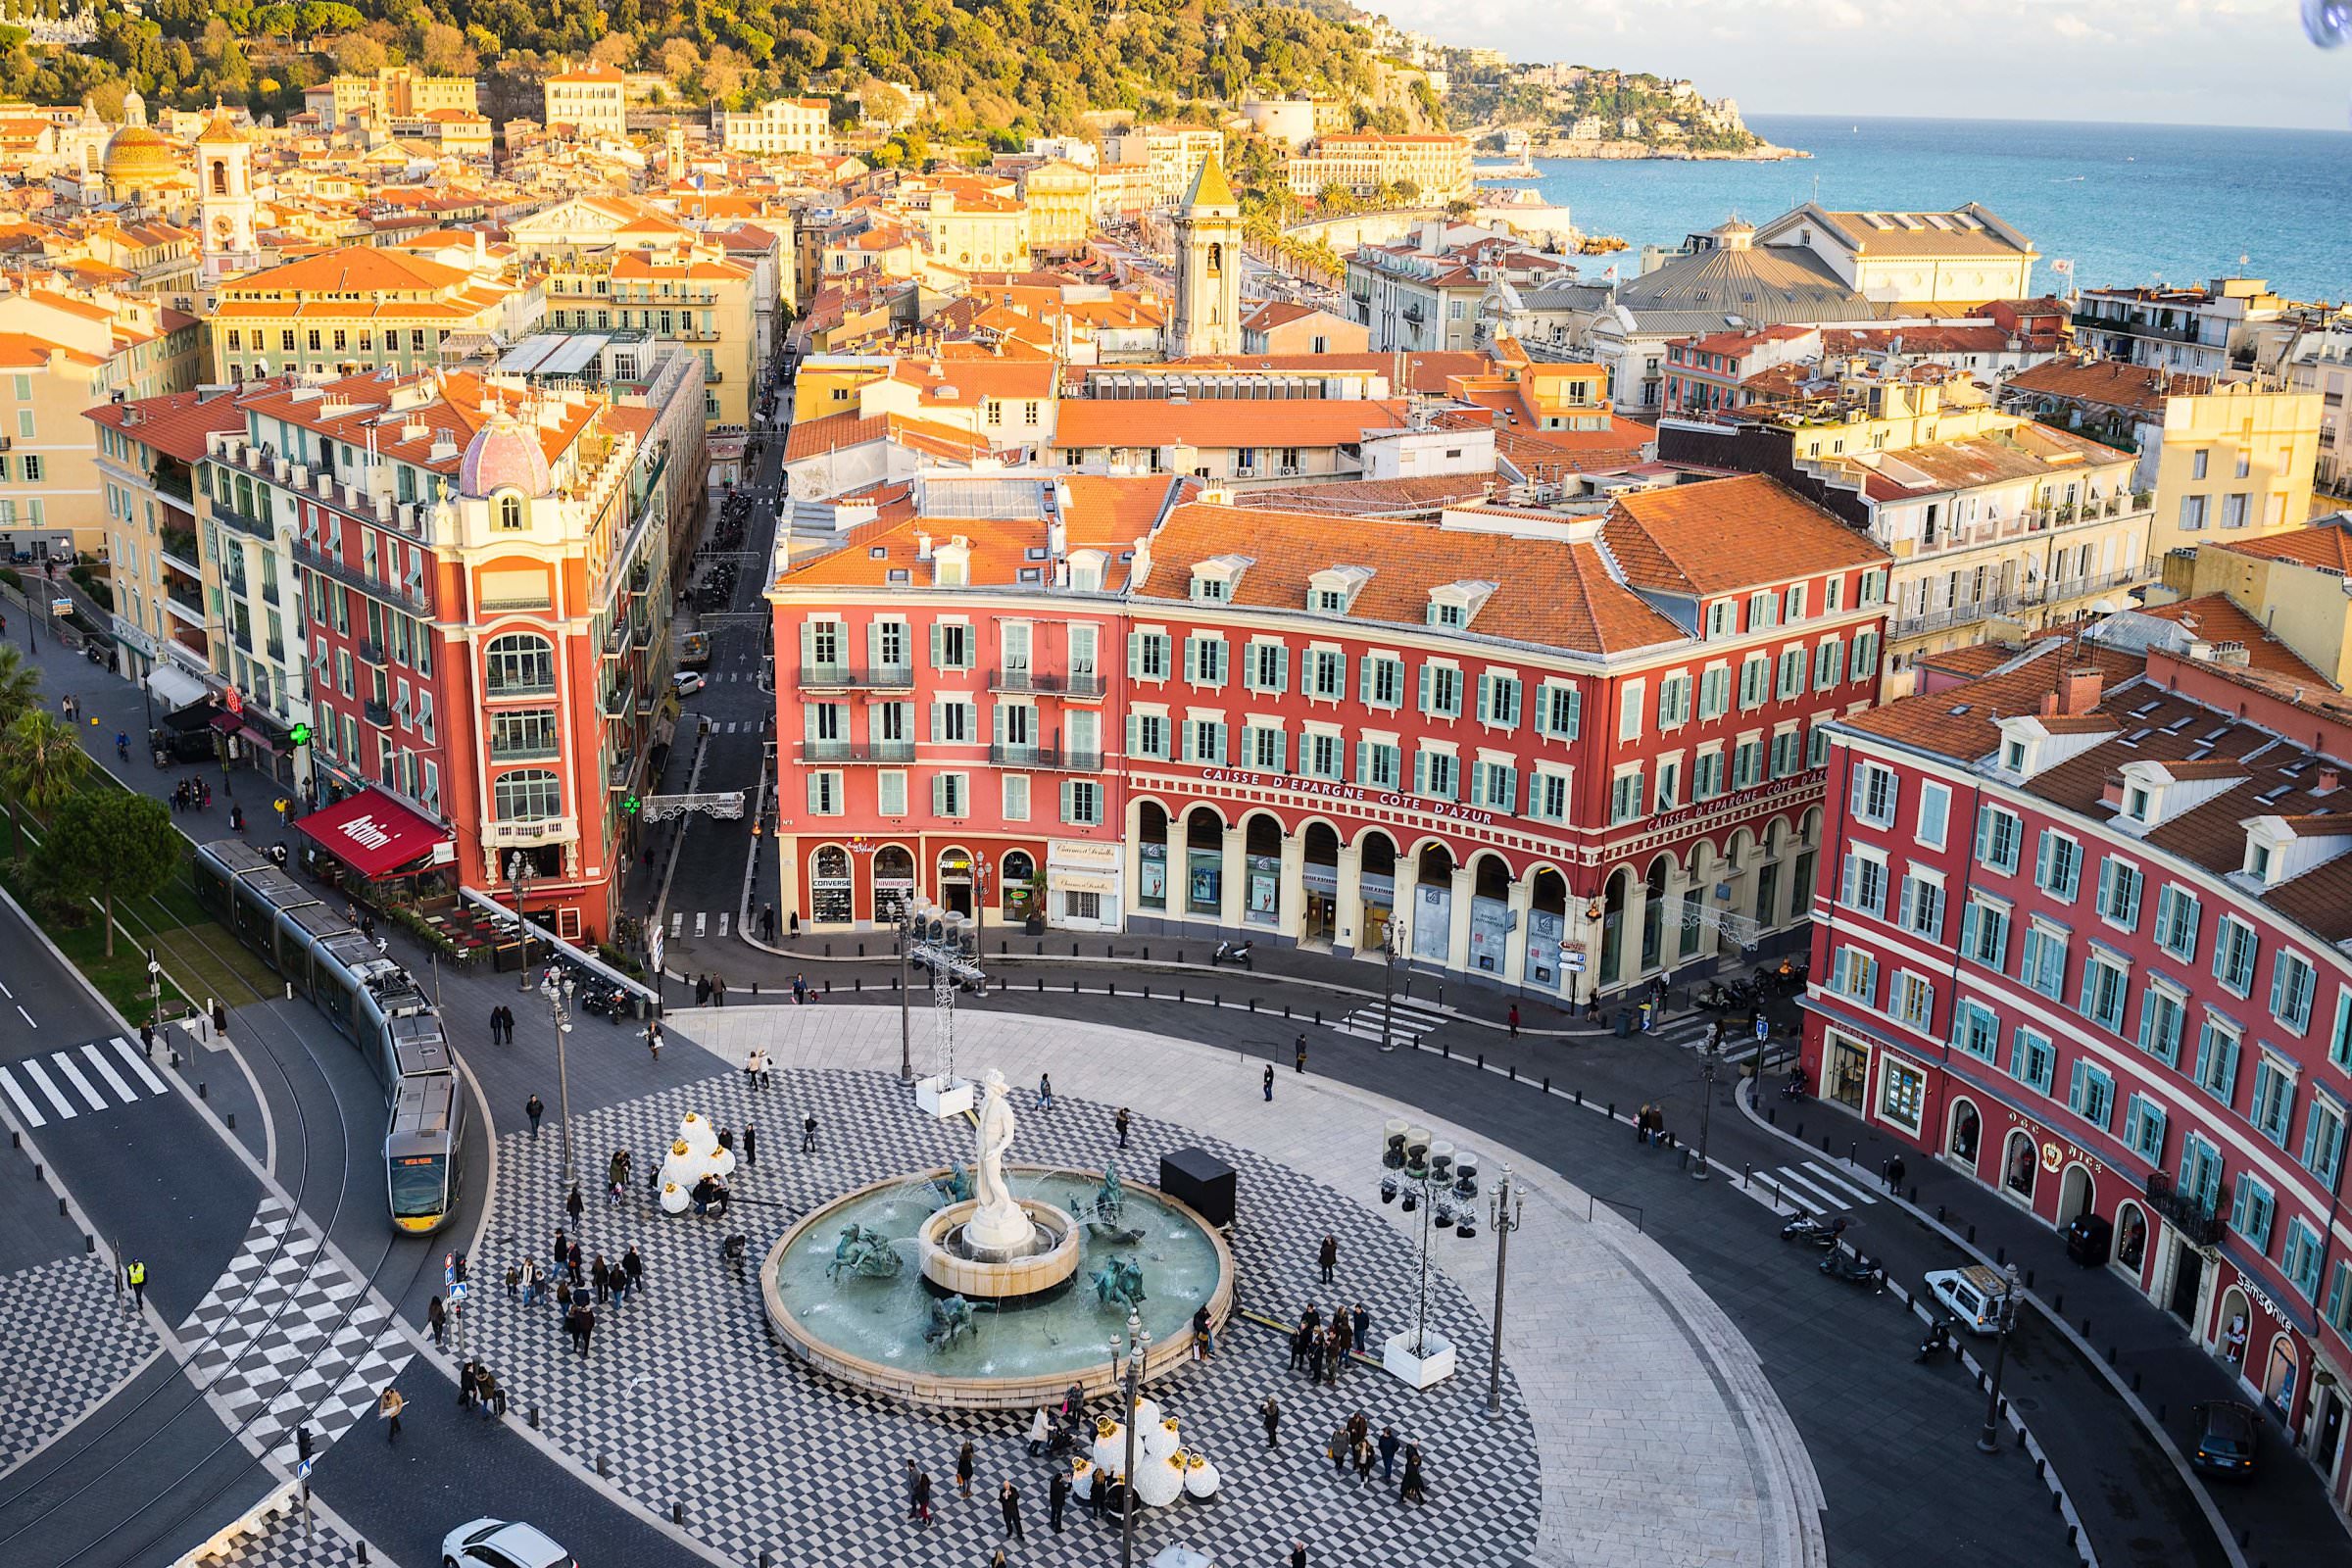 The 17 night Europe vacation itinerary for fun lovers